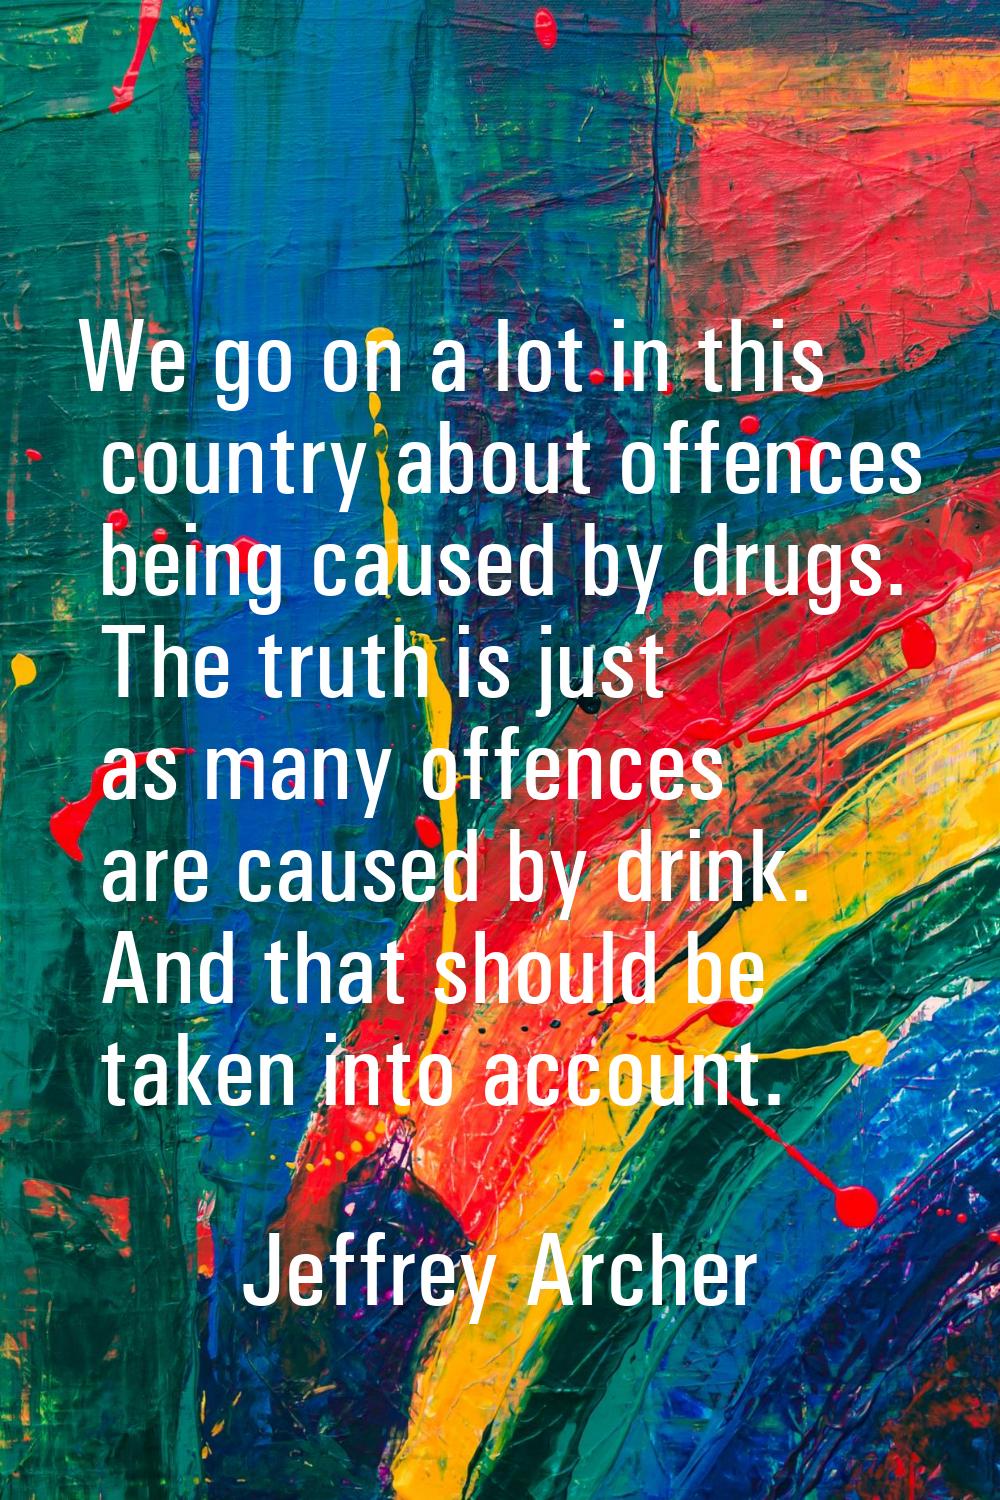 We go on a lot in this country about offences being caused by drugs. The truth is just as many offe